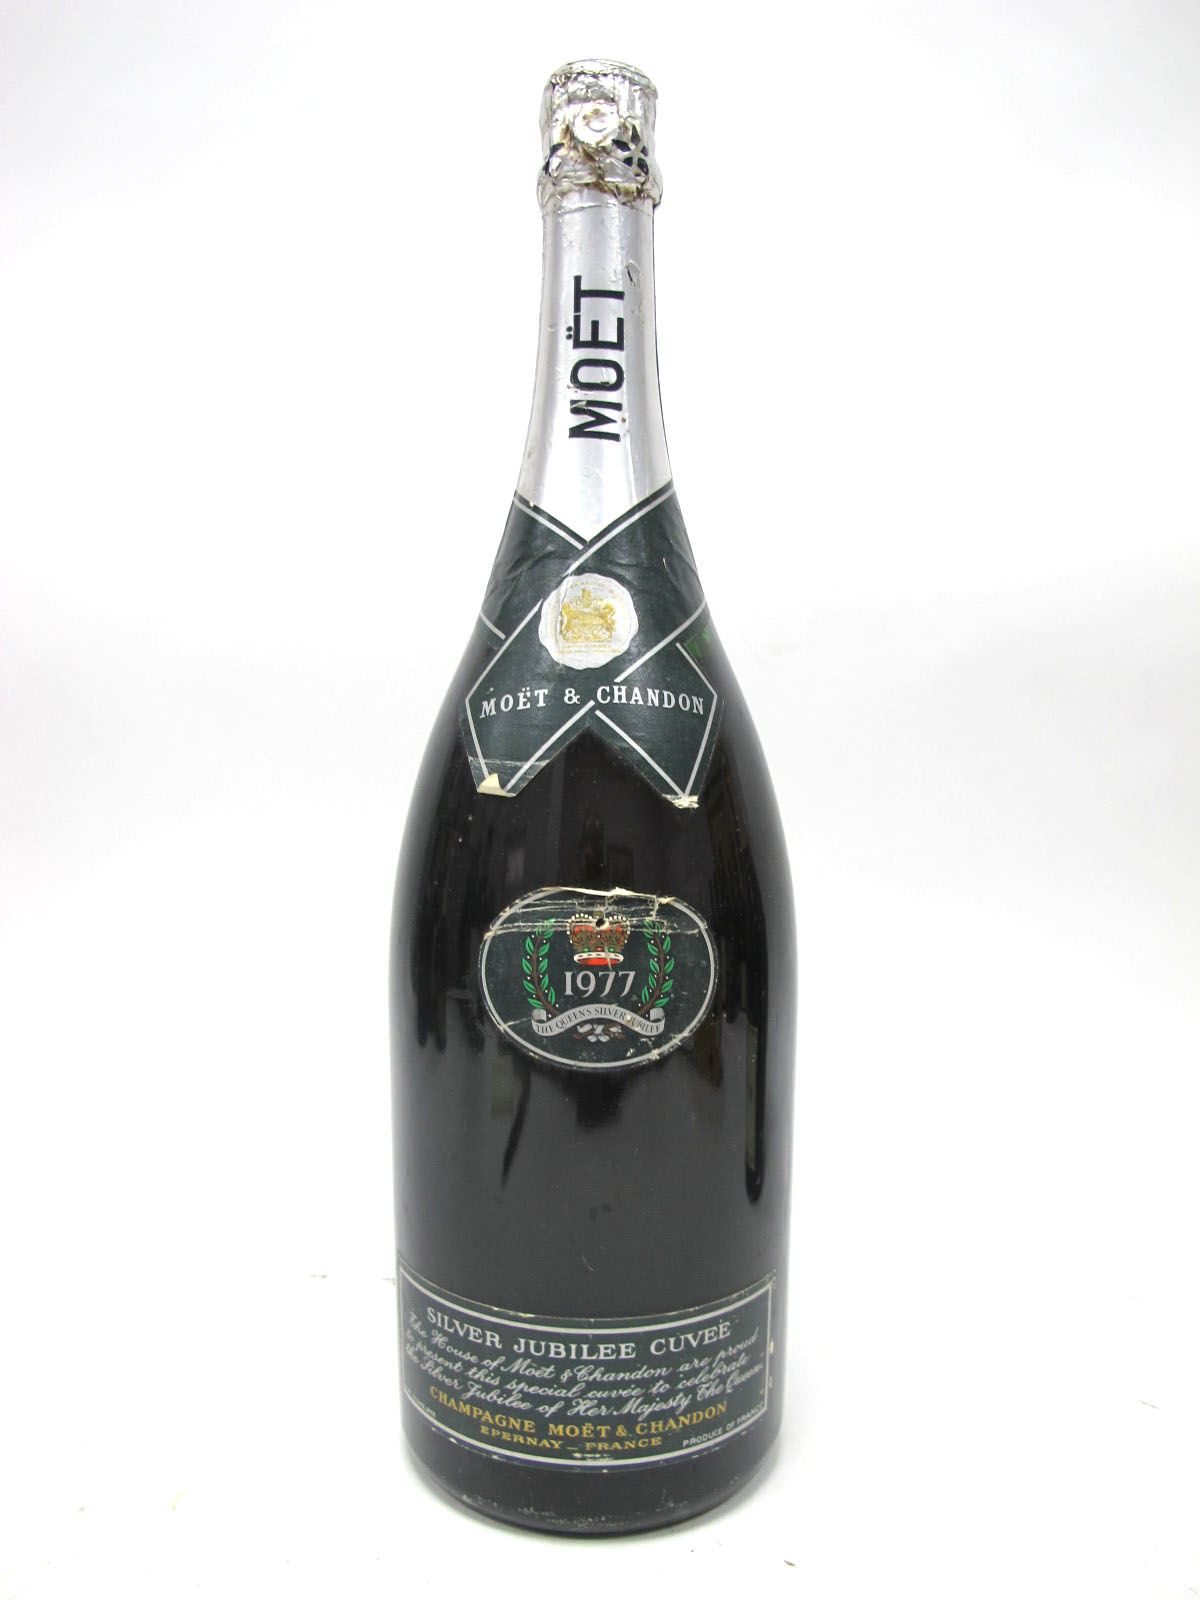 Champagne - Moet & Chandon 1977 Magnum "Silver Jubilee Cuvee" Champagne, size not stated.